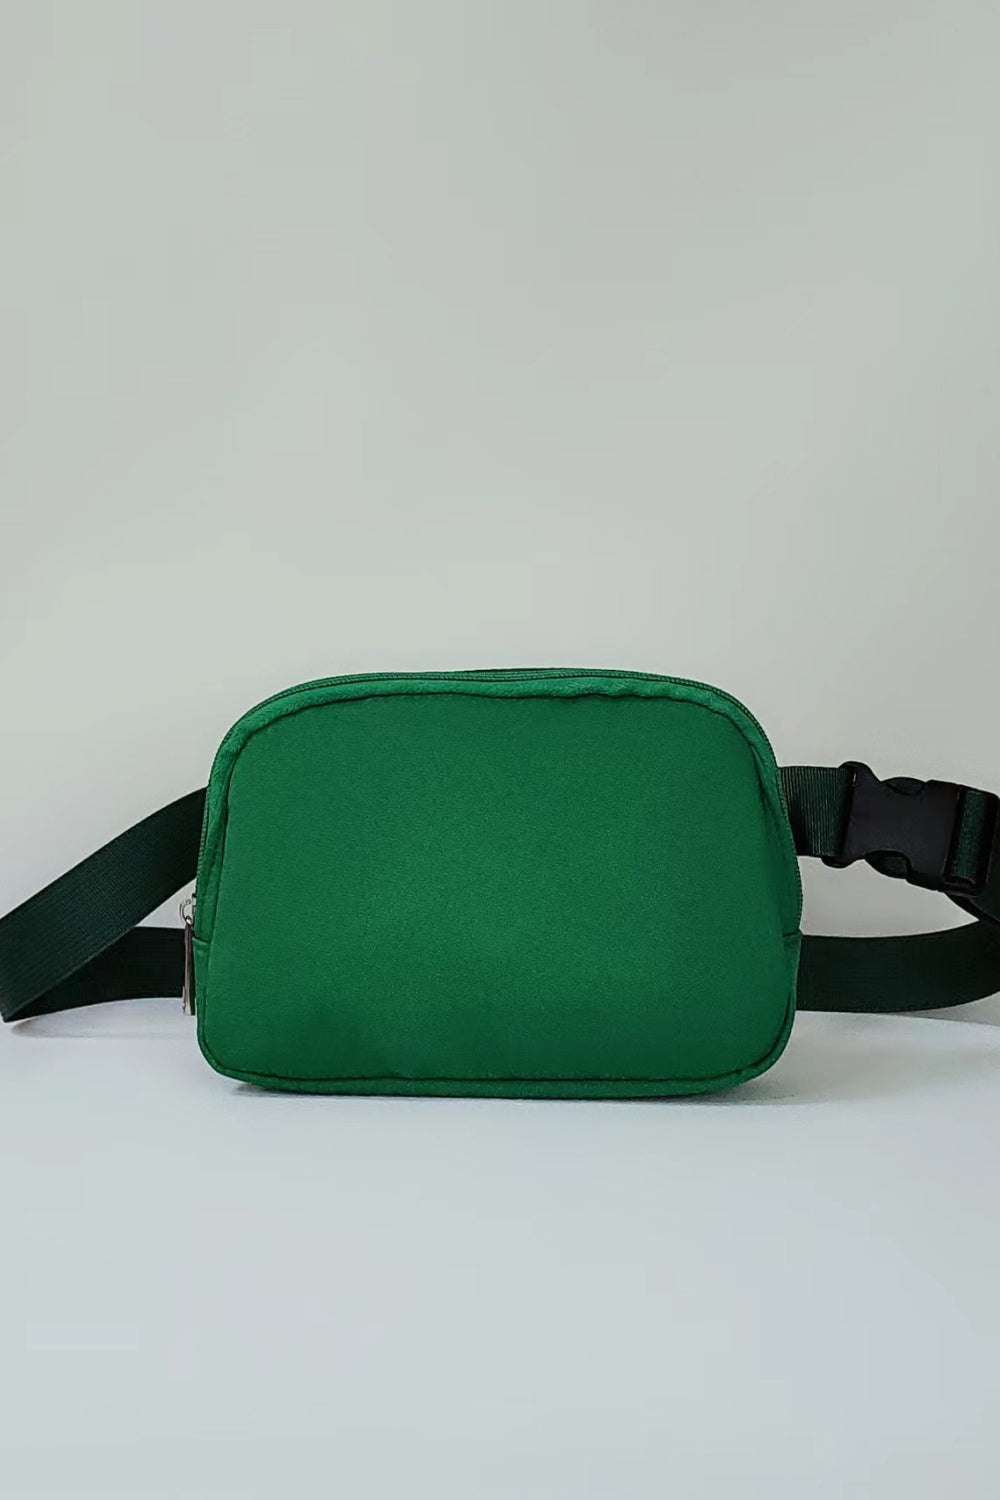 Stylish and Functional Waist Bag for Travel, Hiking, and Everyday Use